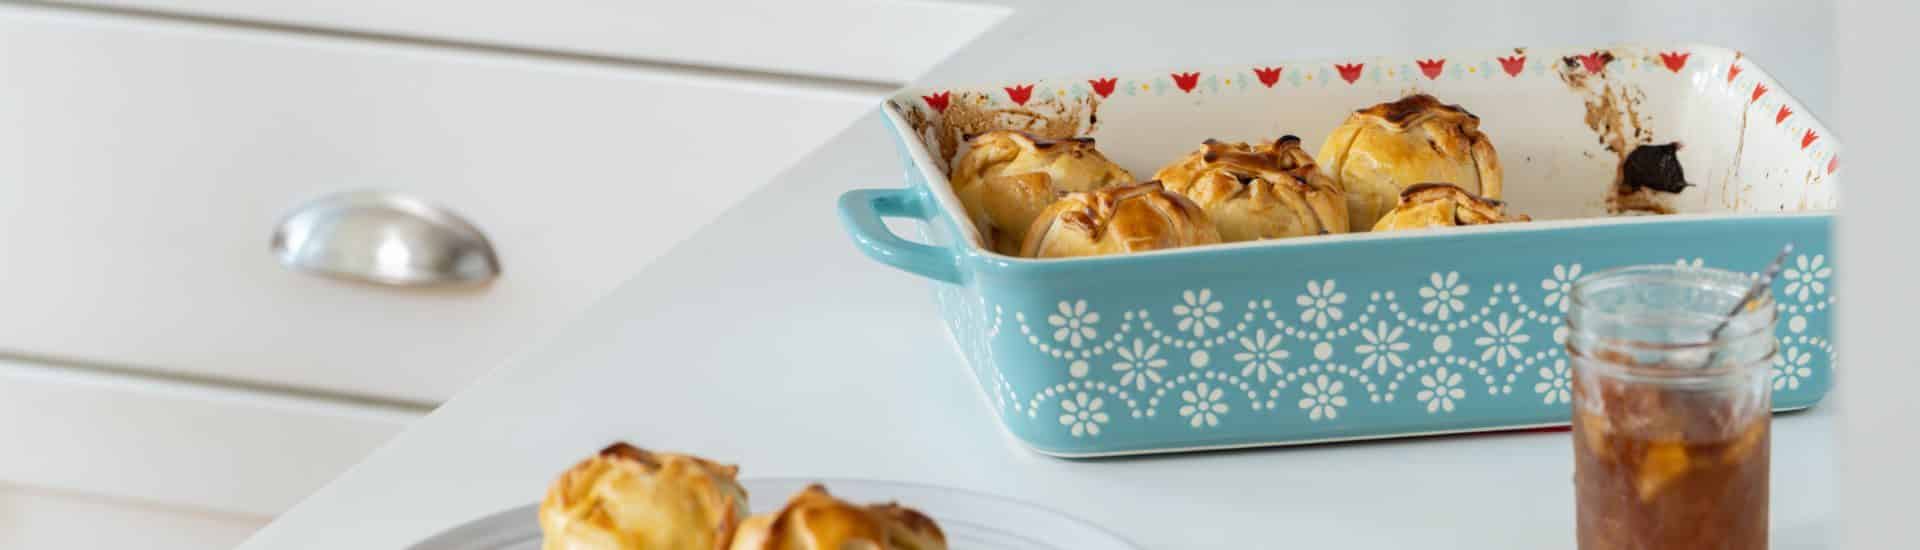 Close up view of apple dumplings in a light blue casserole dish on white counter